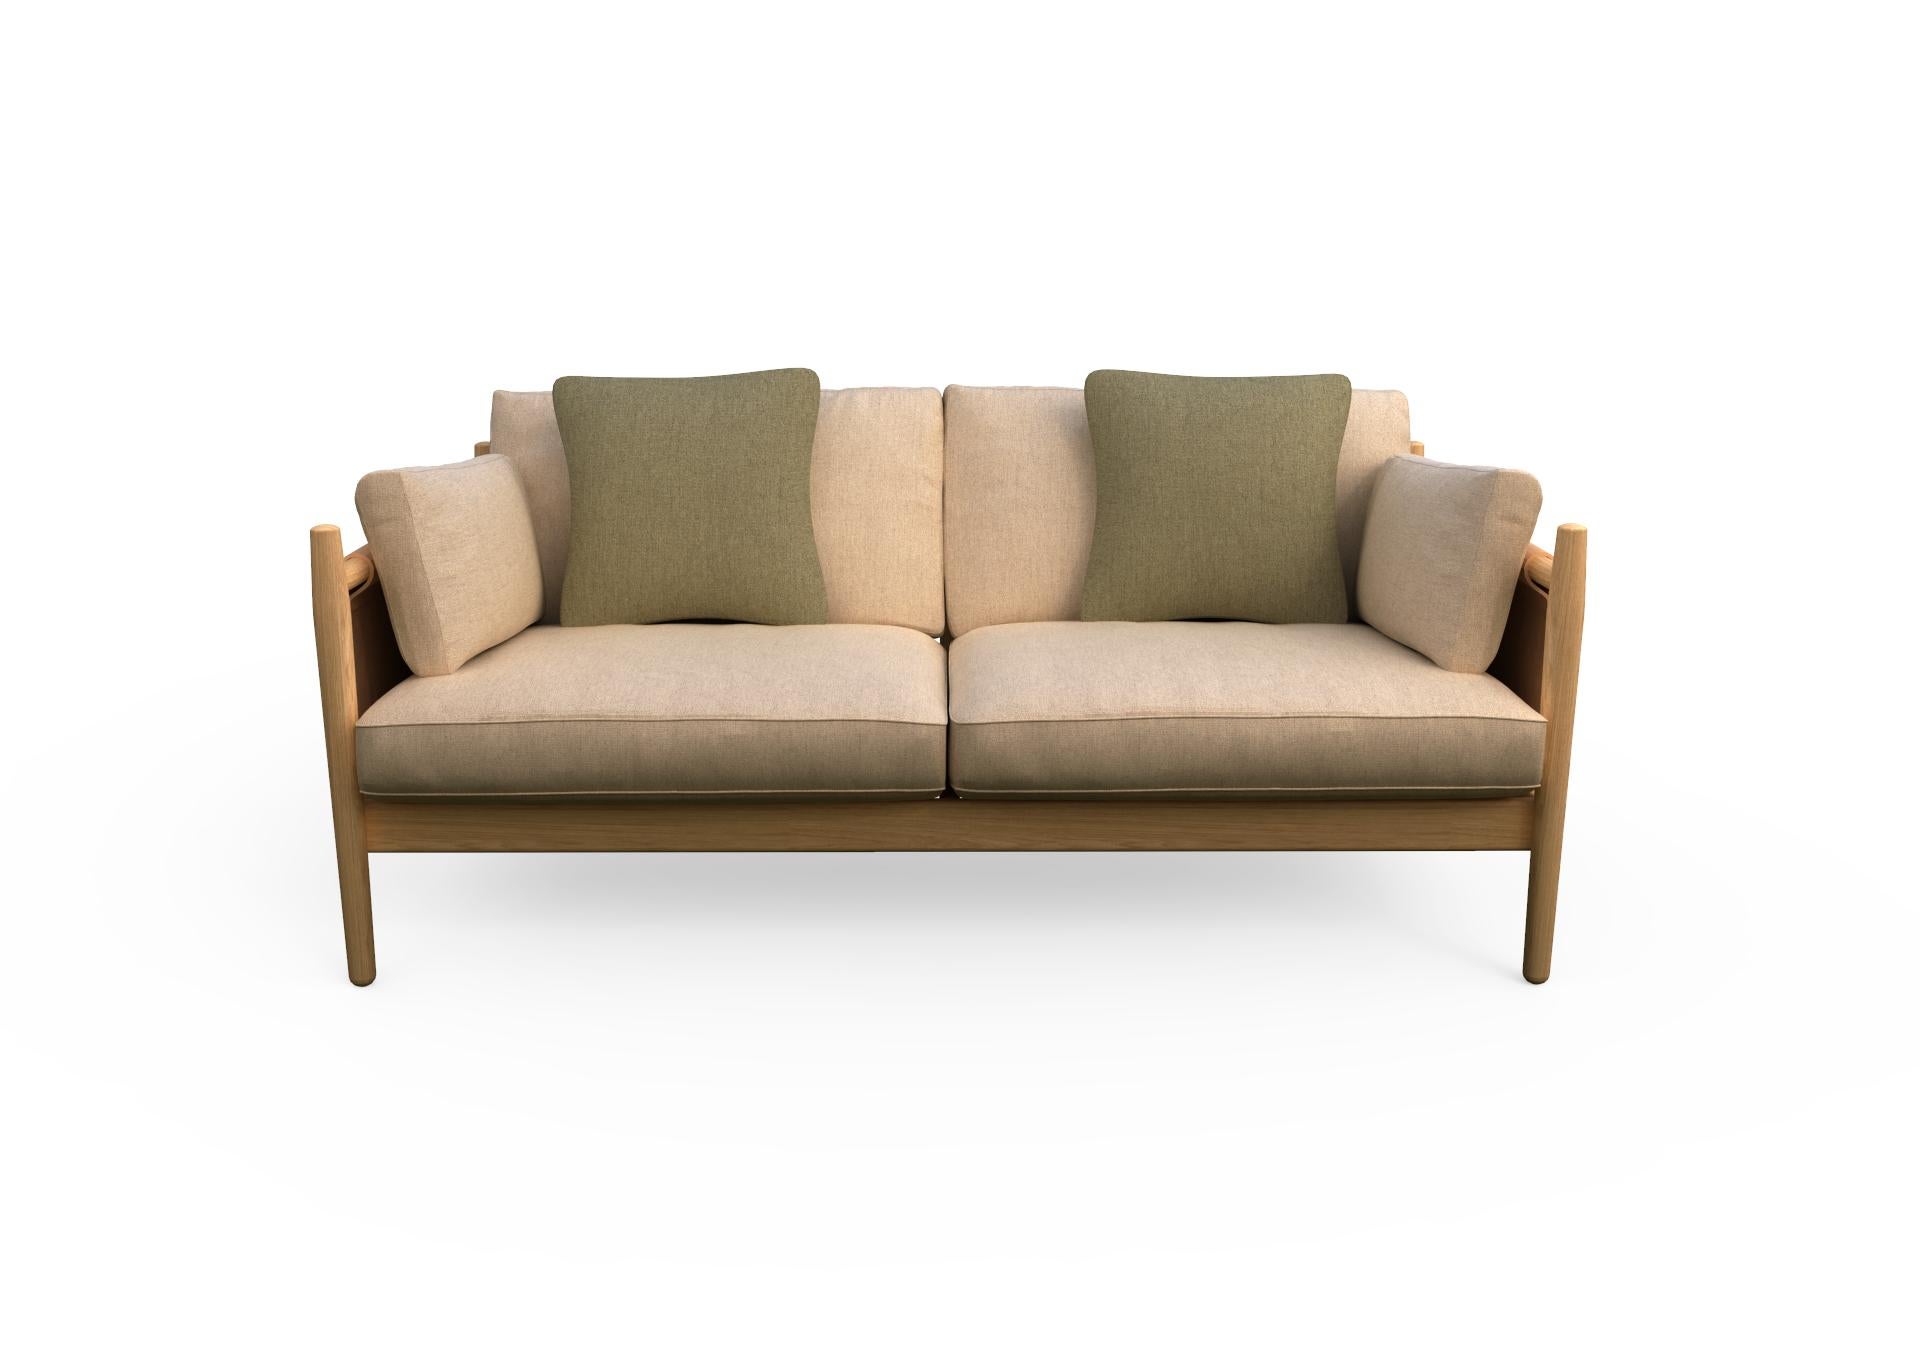 This sofa is perfect for when you want to show the back of it. It doesn’t have to be up against a wall. This contemporary yet Classic design is a perfect piece to give your space a distinguished accent. The structure is made of solid oakwood, the